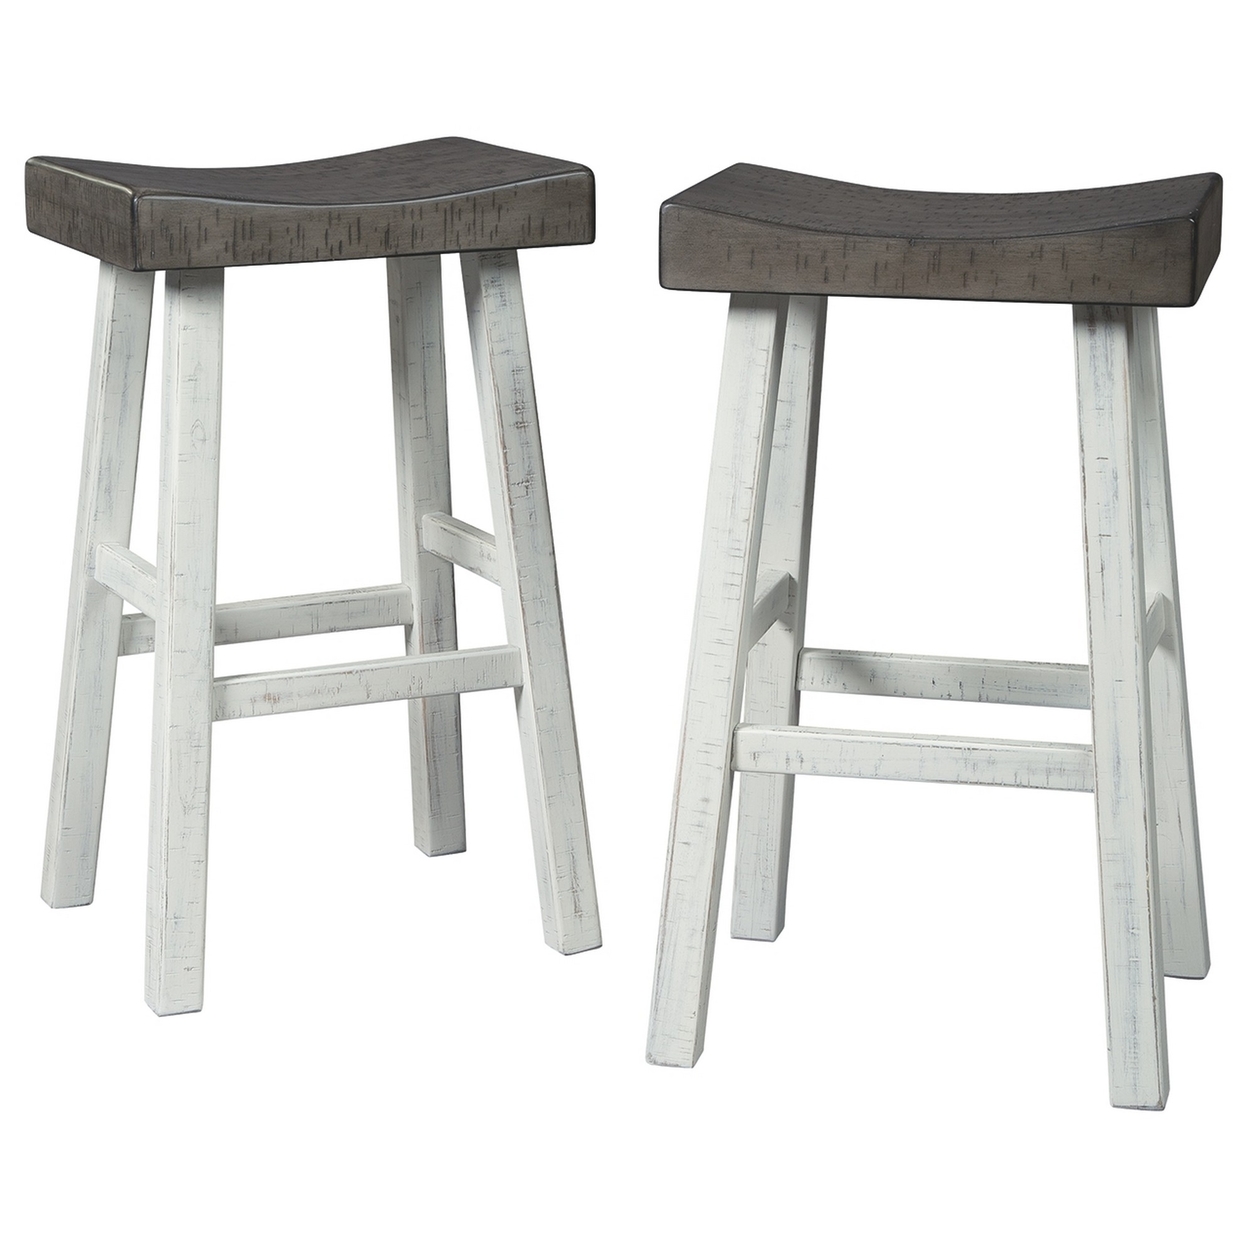 31 Inch Wooden Saddle Stool With Angular Legs, Set Of 2, Brown And White- Saltoro Sherpi